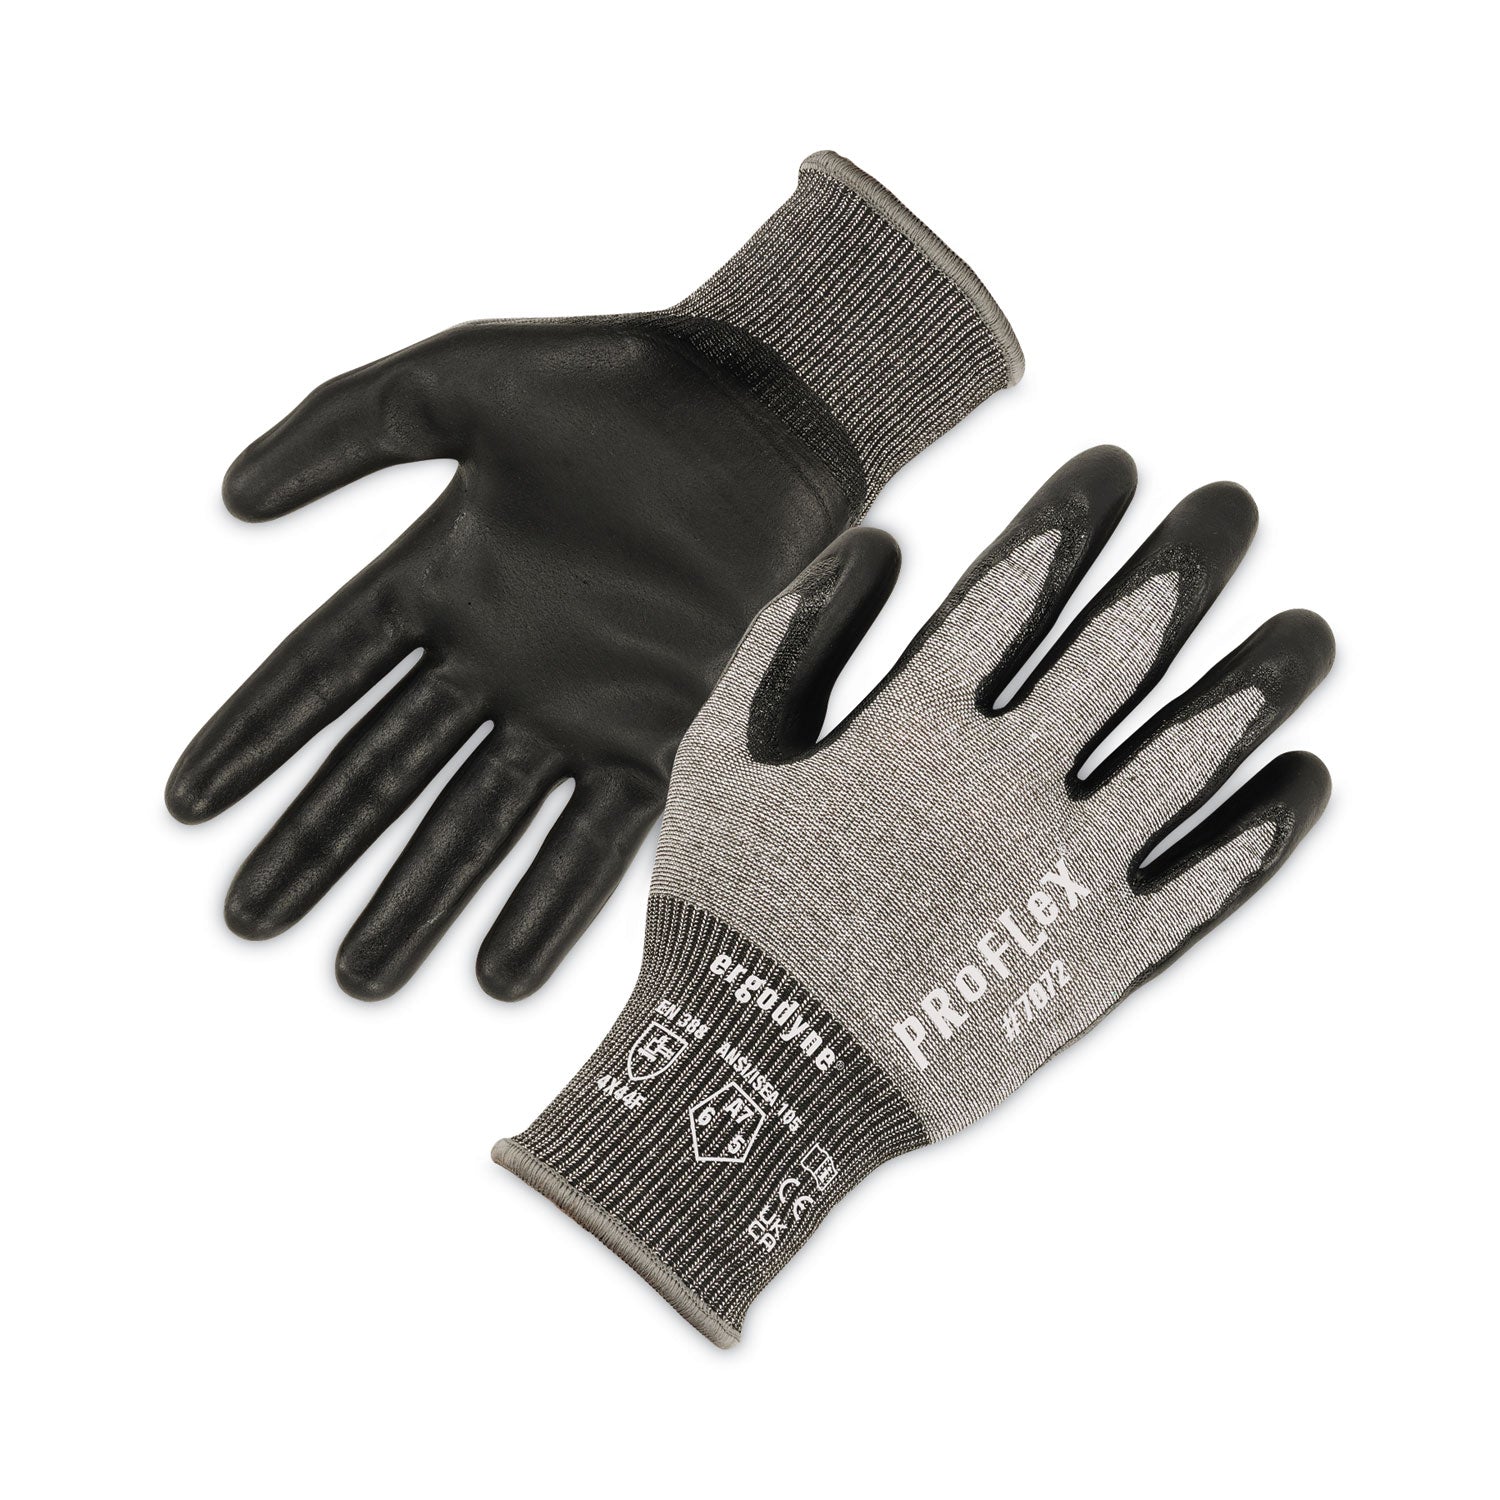 proflex-7072-ansi-a7-nitrile-coated-cr-gloves-gray-small-pair-ships-in-1-3-business-days_ego10312 - 1